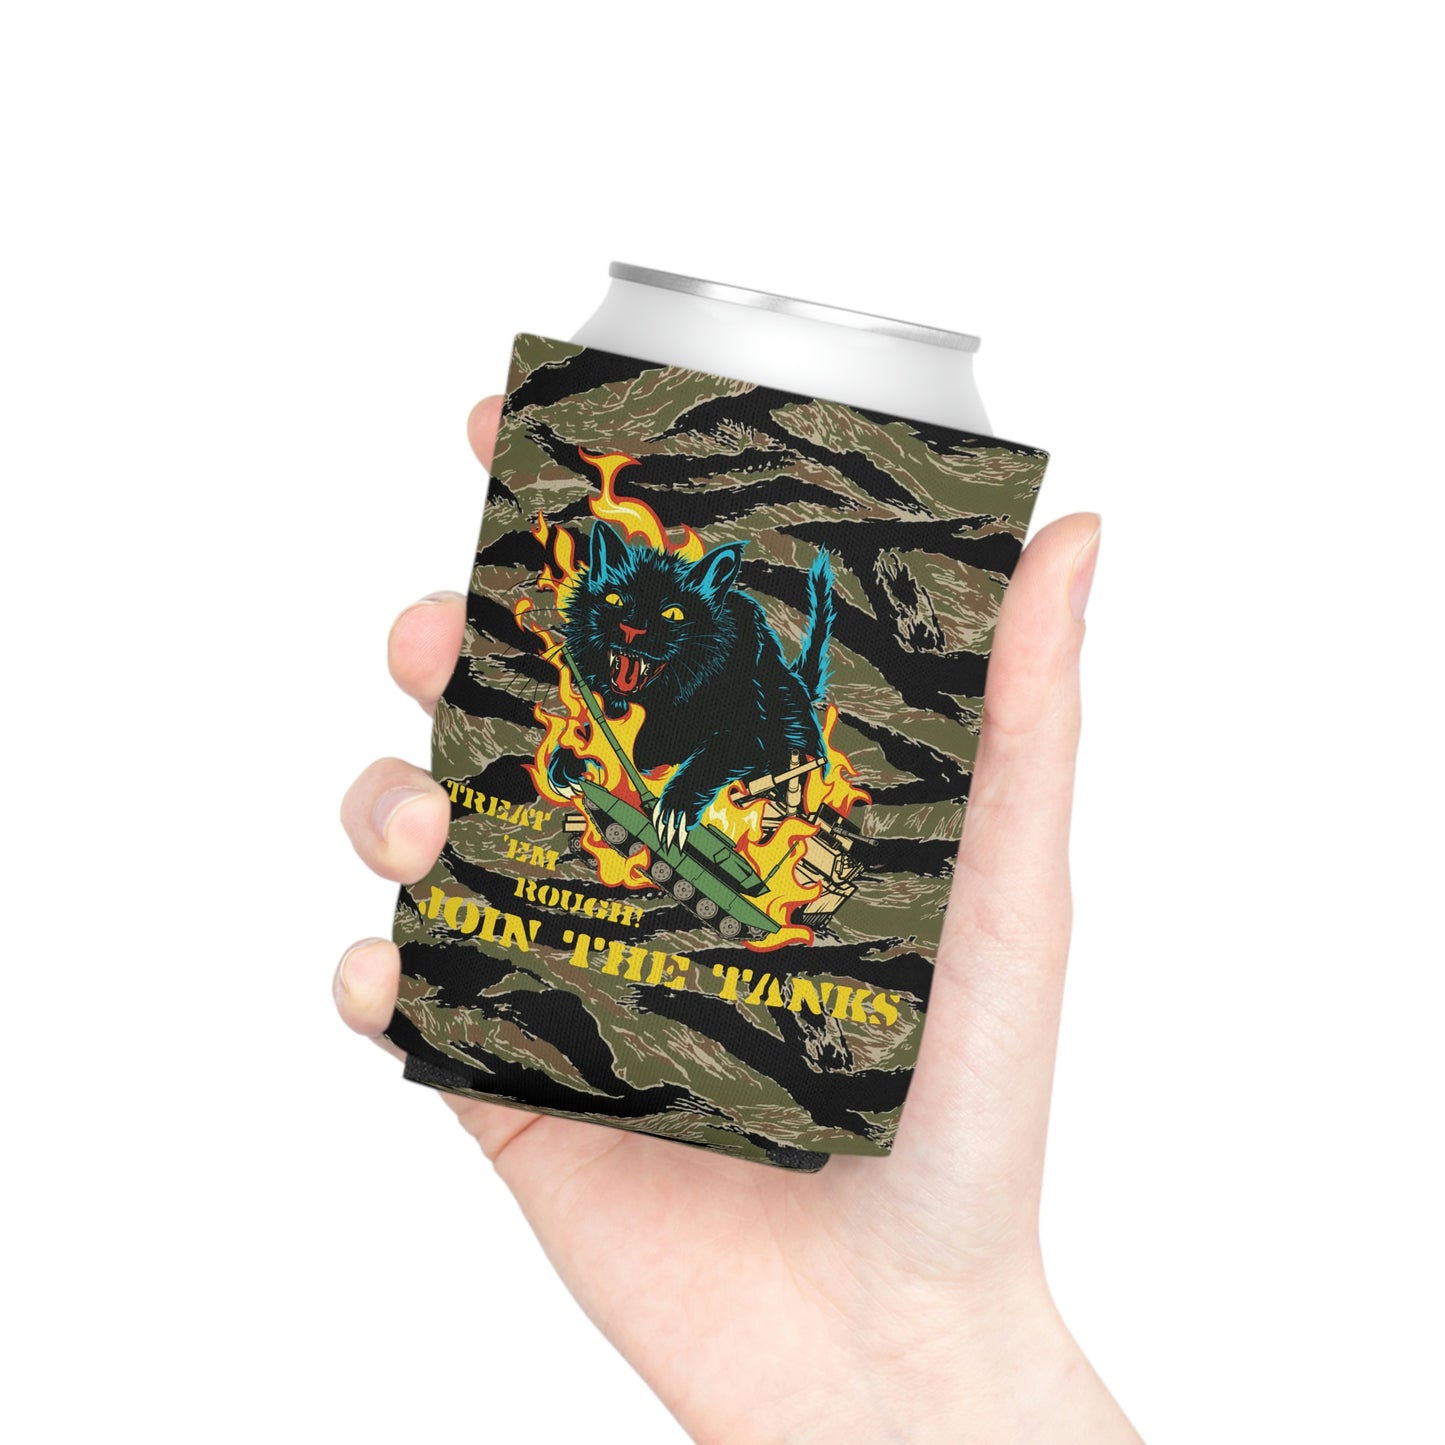 Tiger Stripe Can Coozie